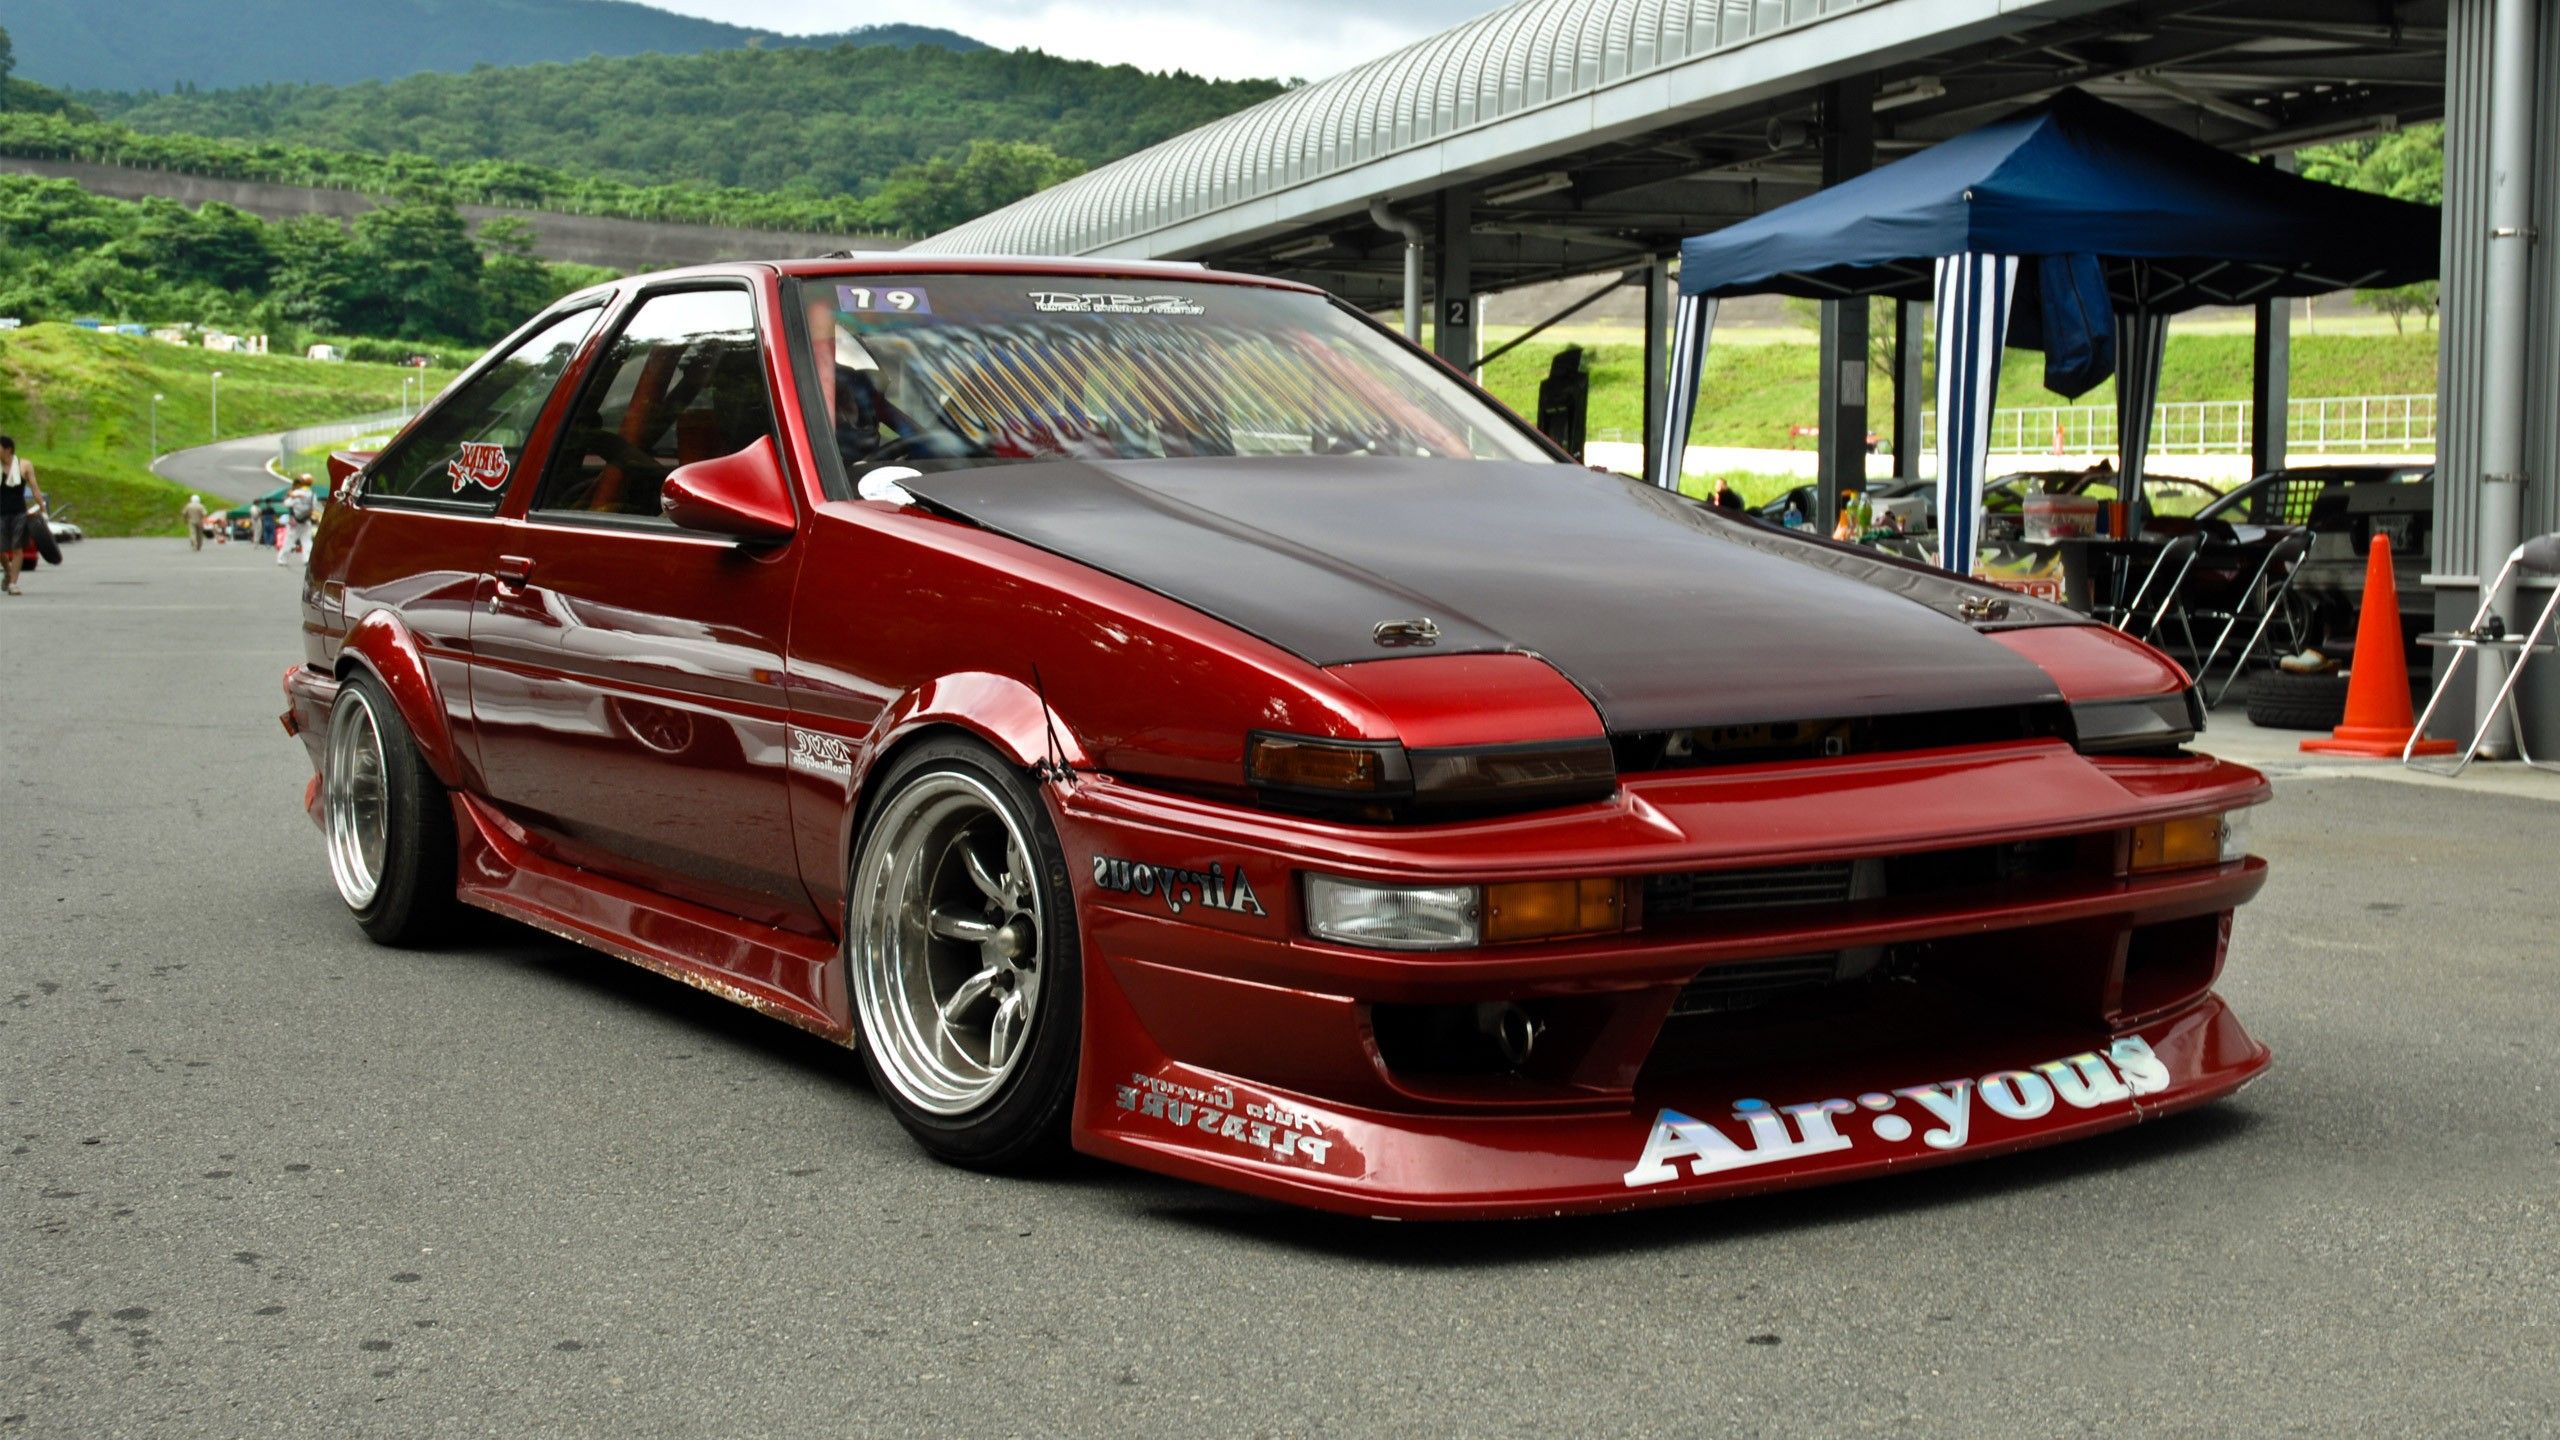 Free download Cars Toyota AE86 jdm wallpapers 2560x1440 56356